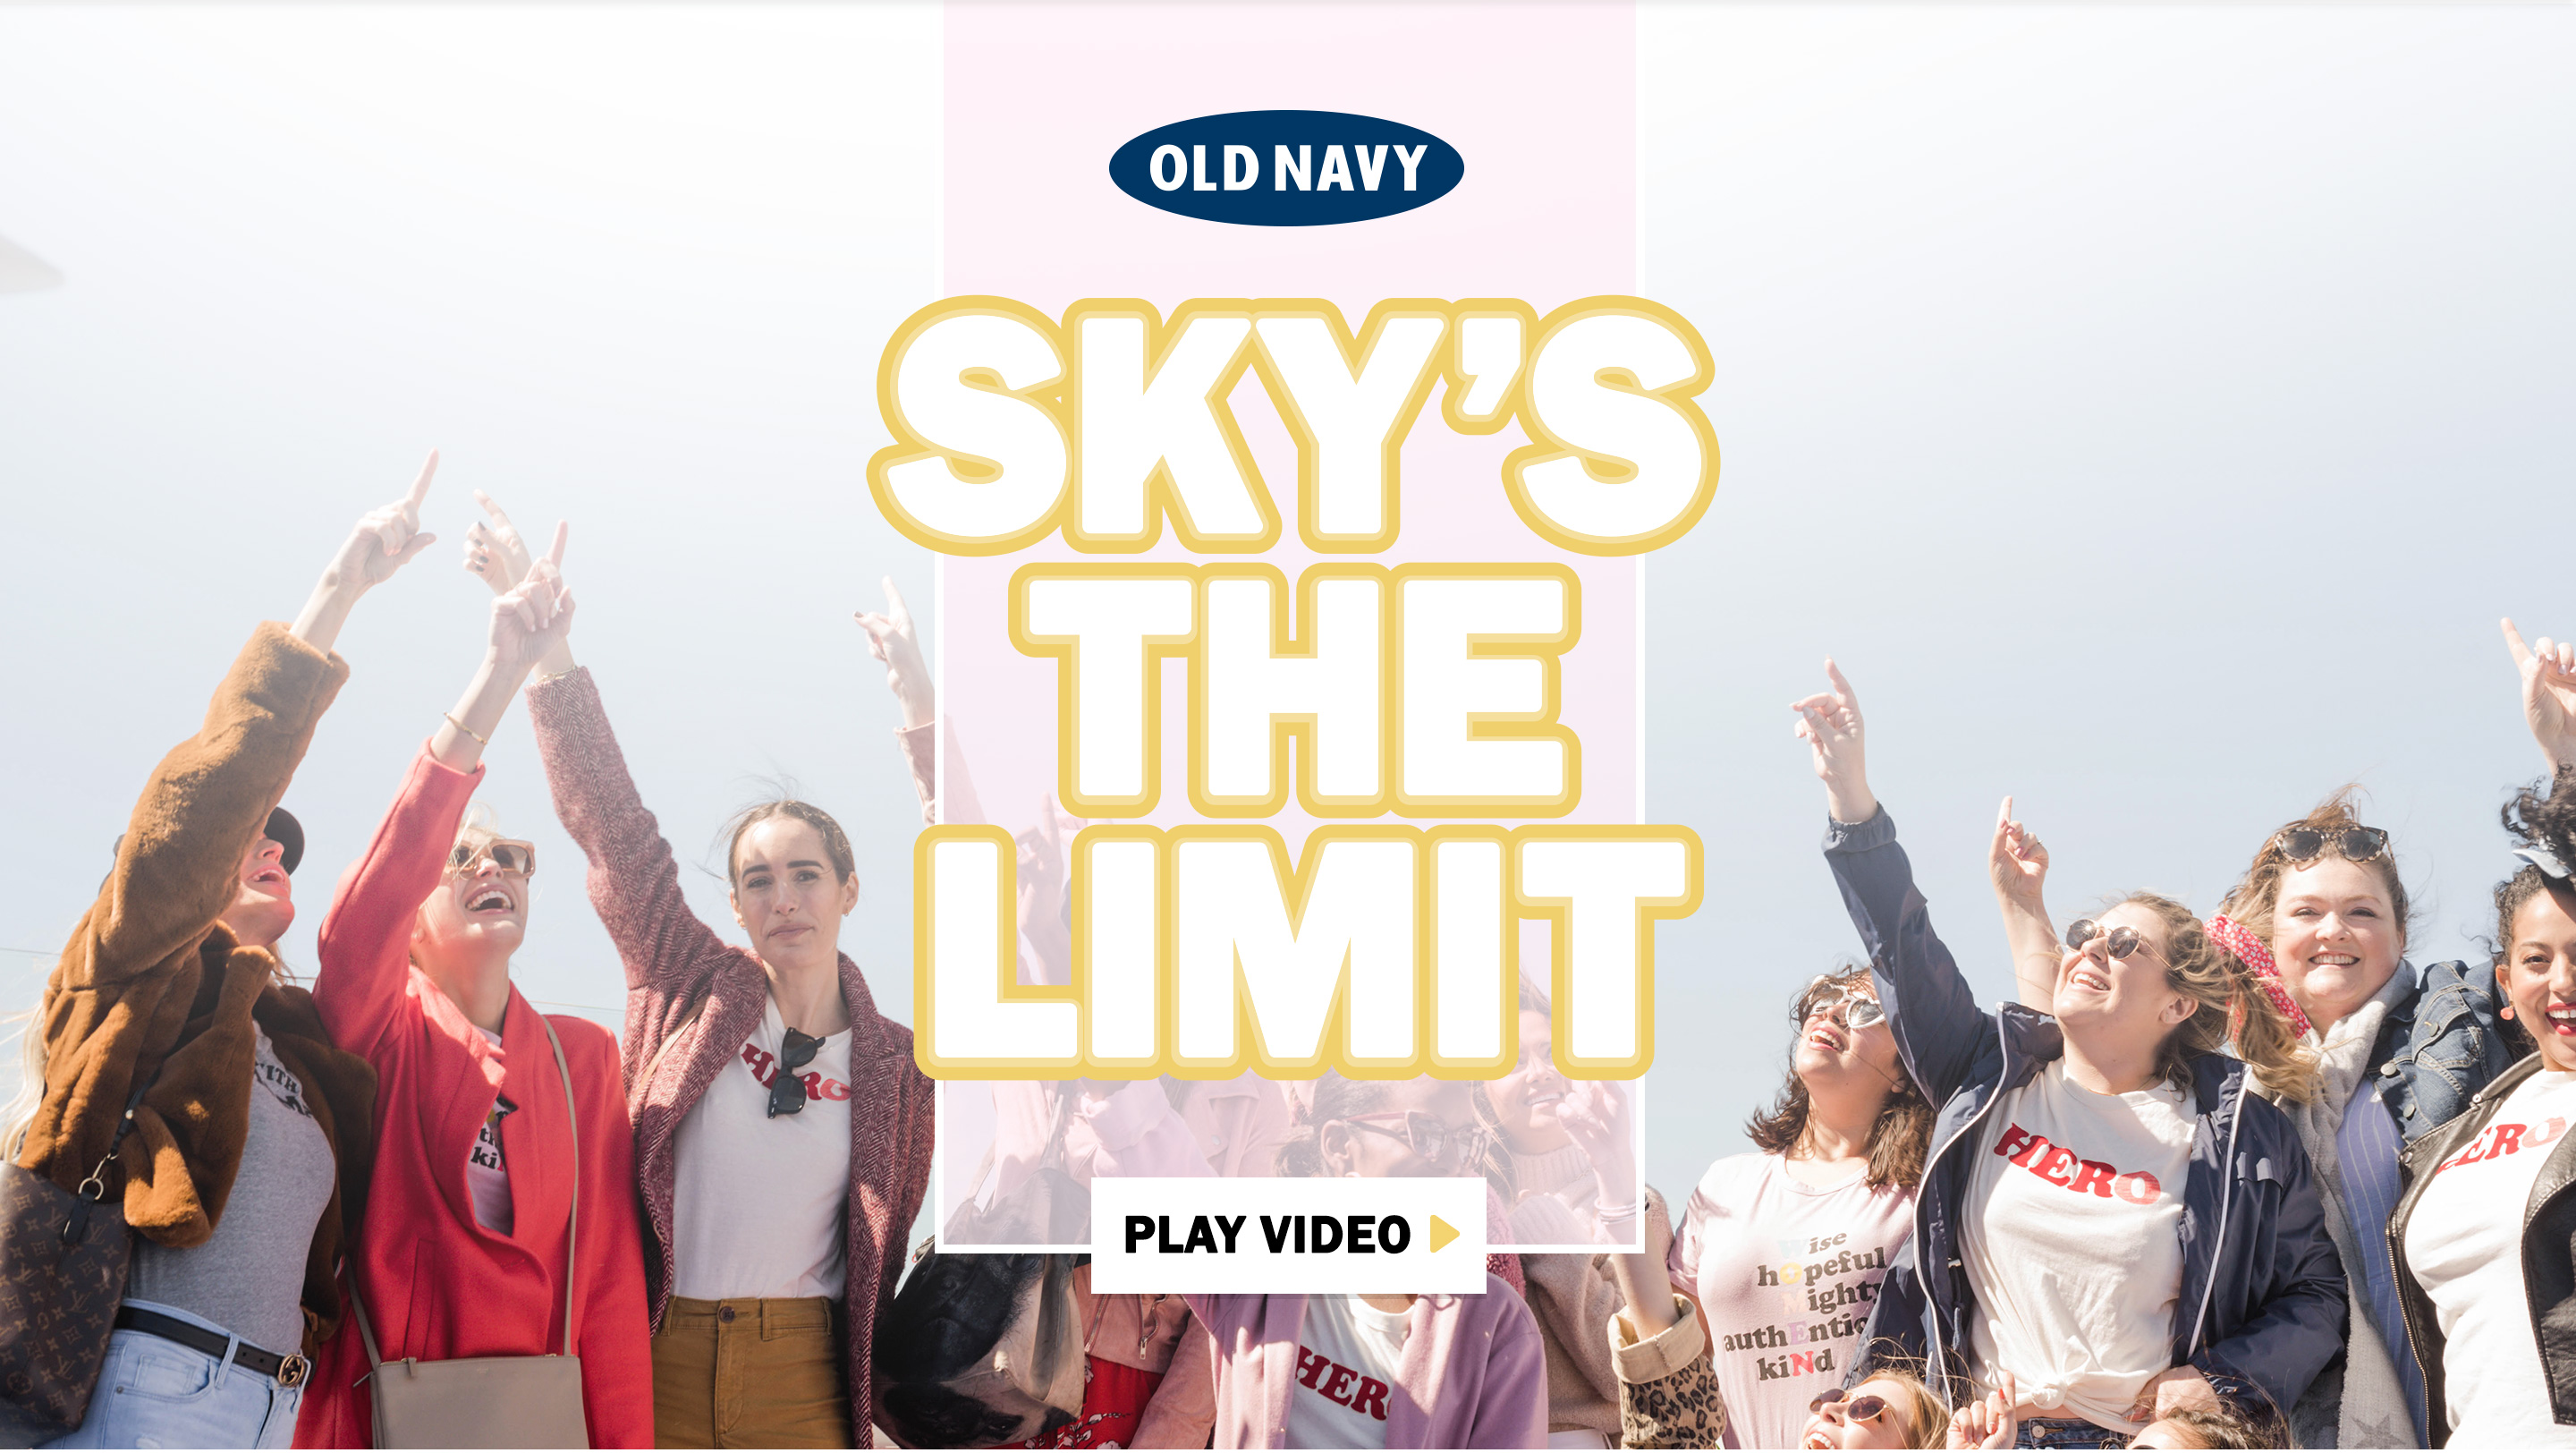 Old Navy Skys the Limit